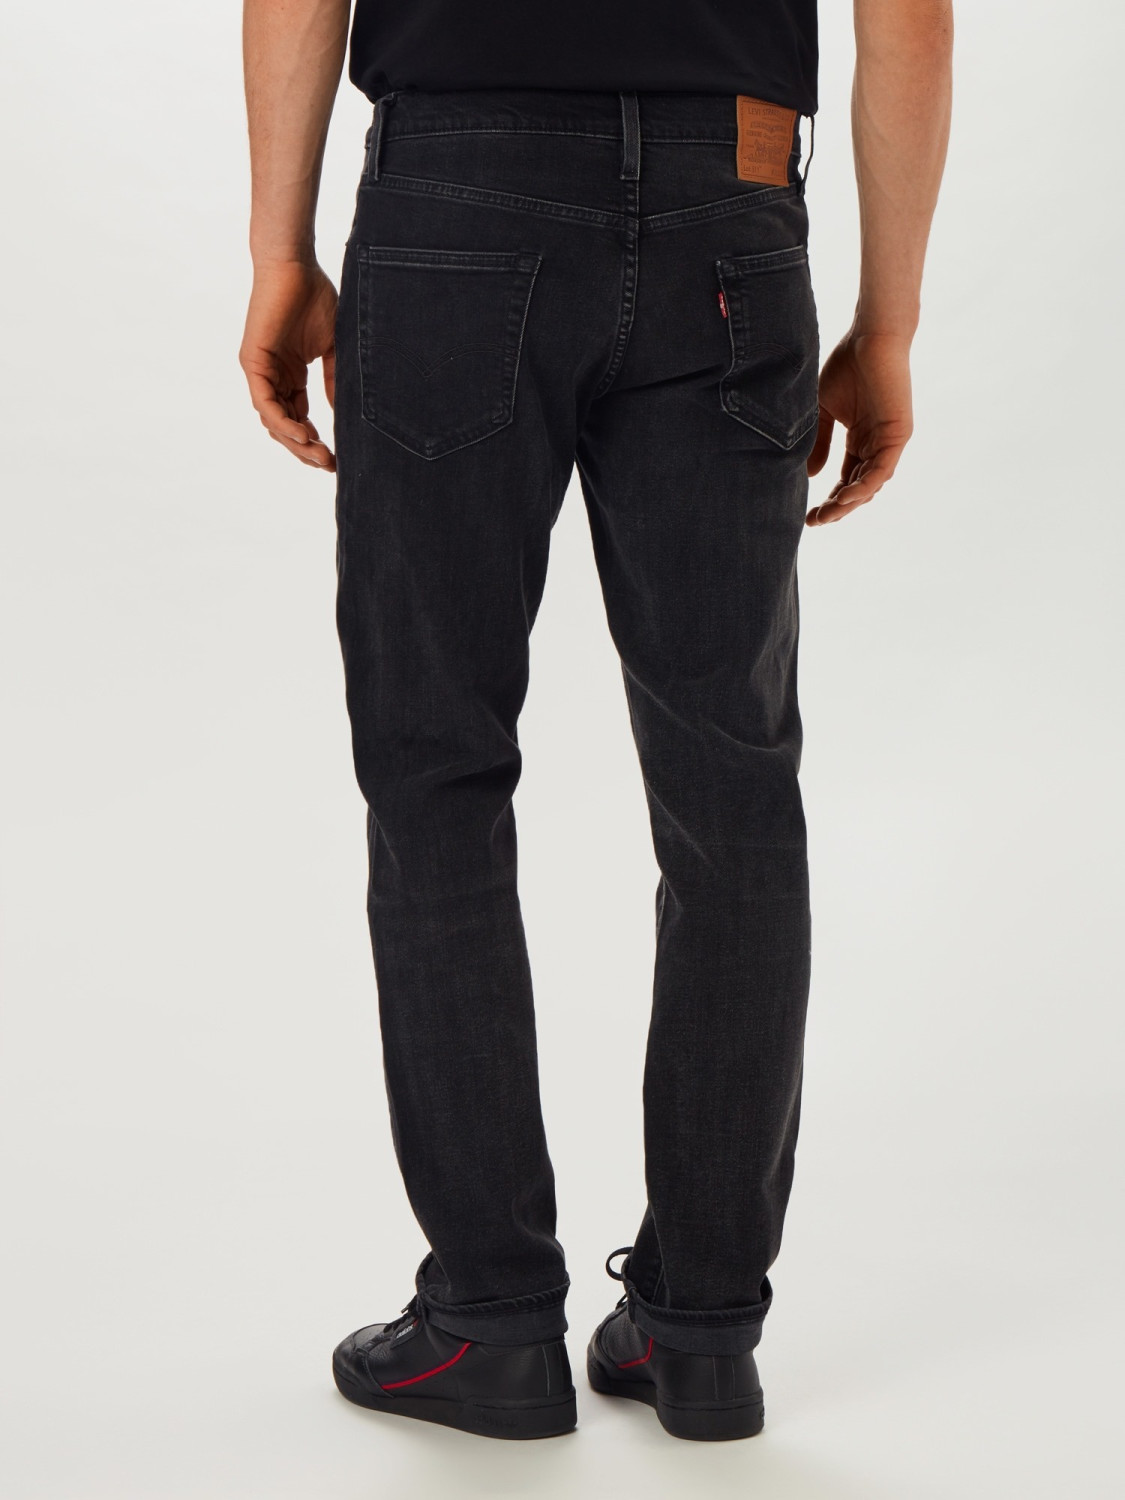 Buy Levi's 511 Slim Fit Men caboose black from £41.88 (Today) – Best ...